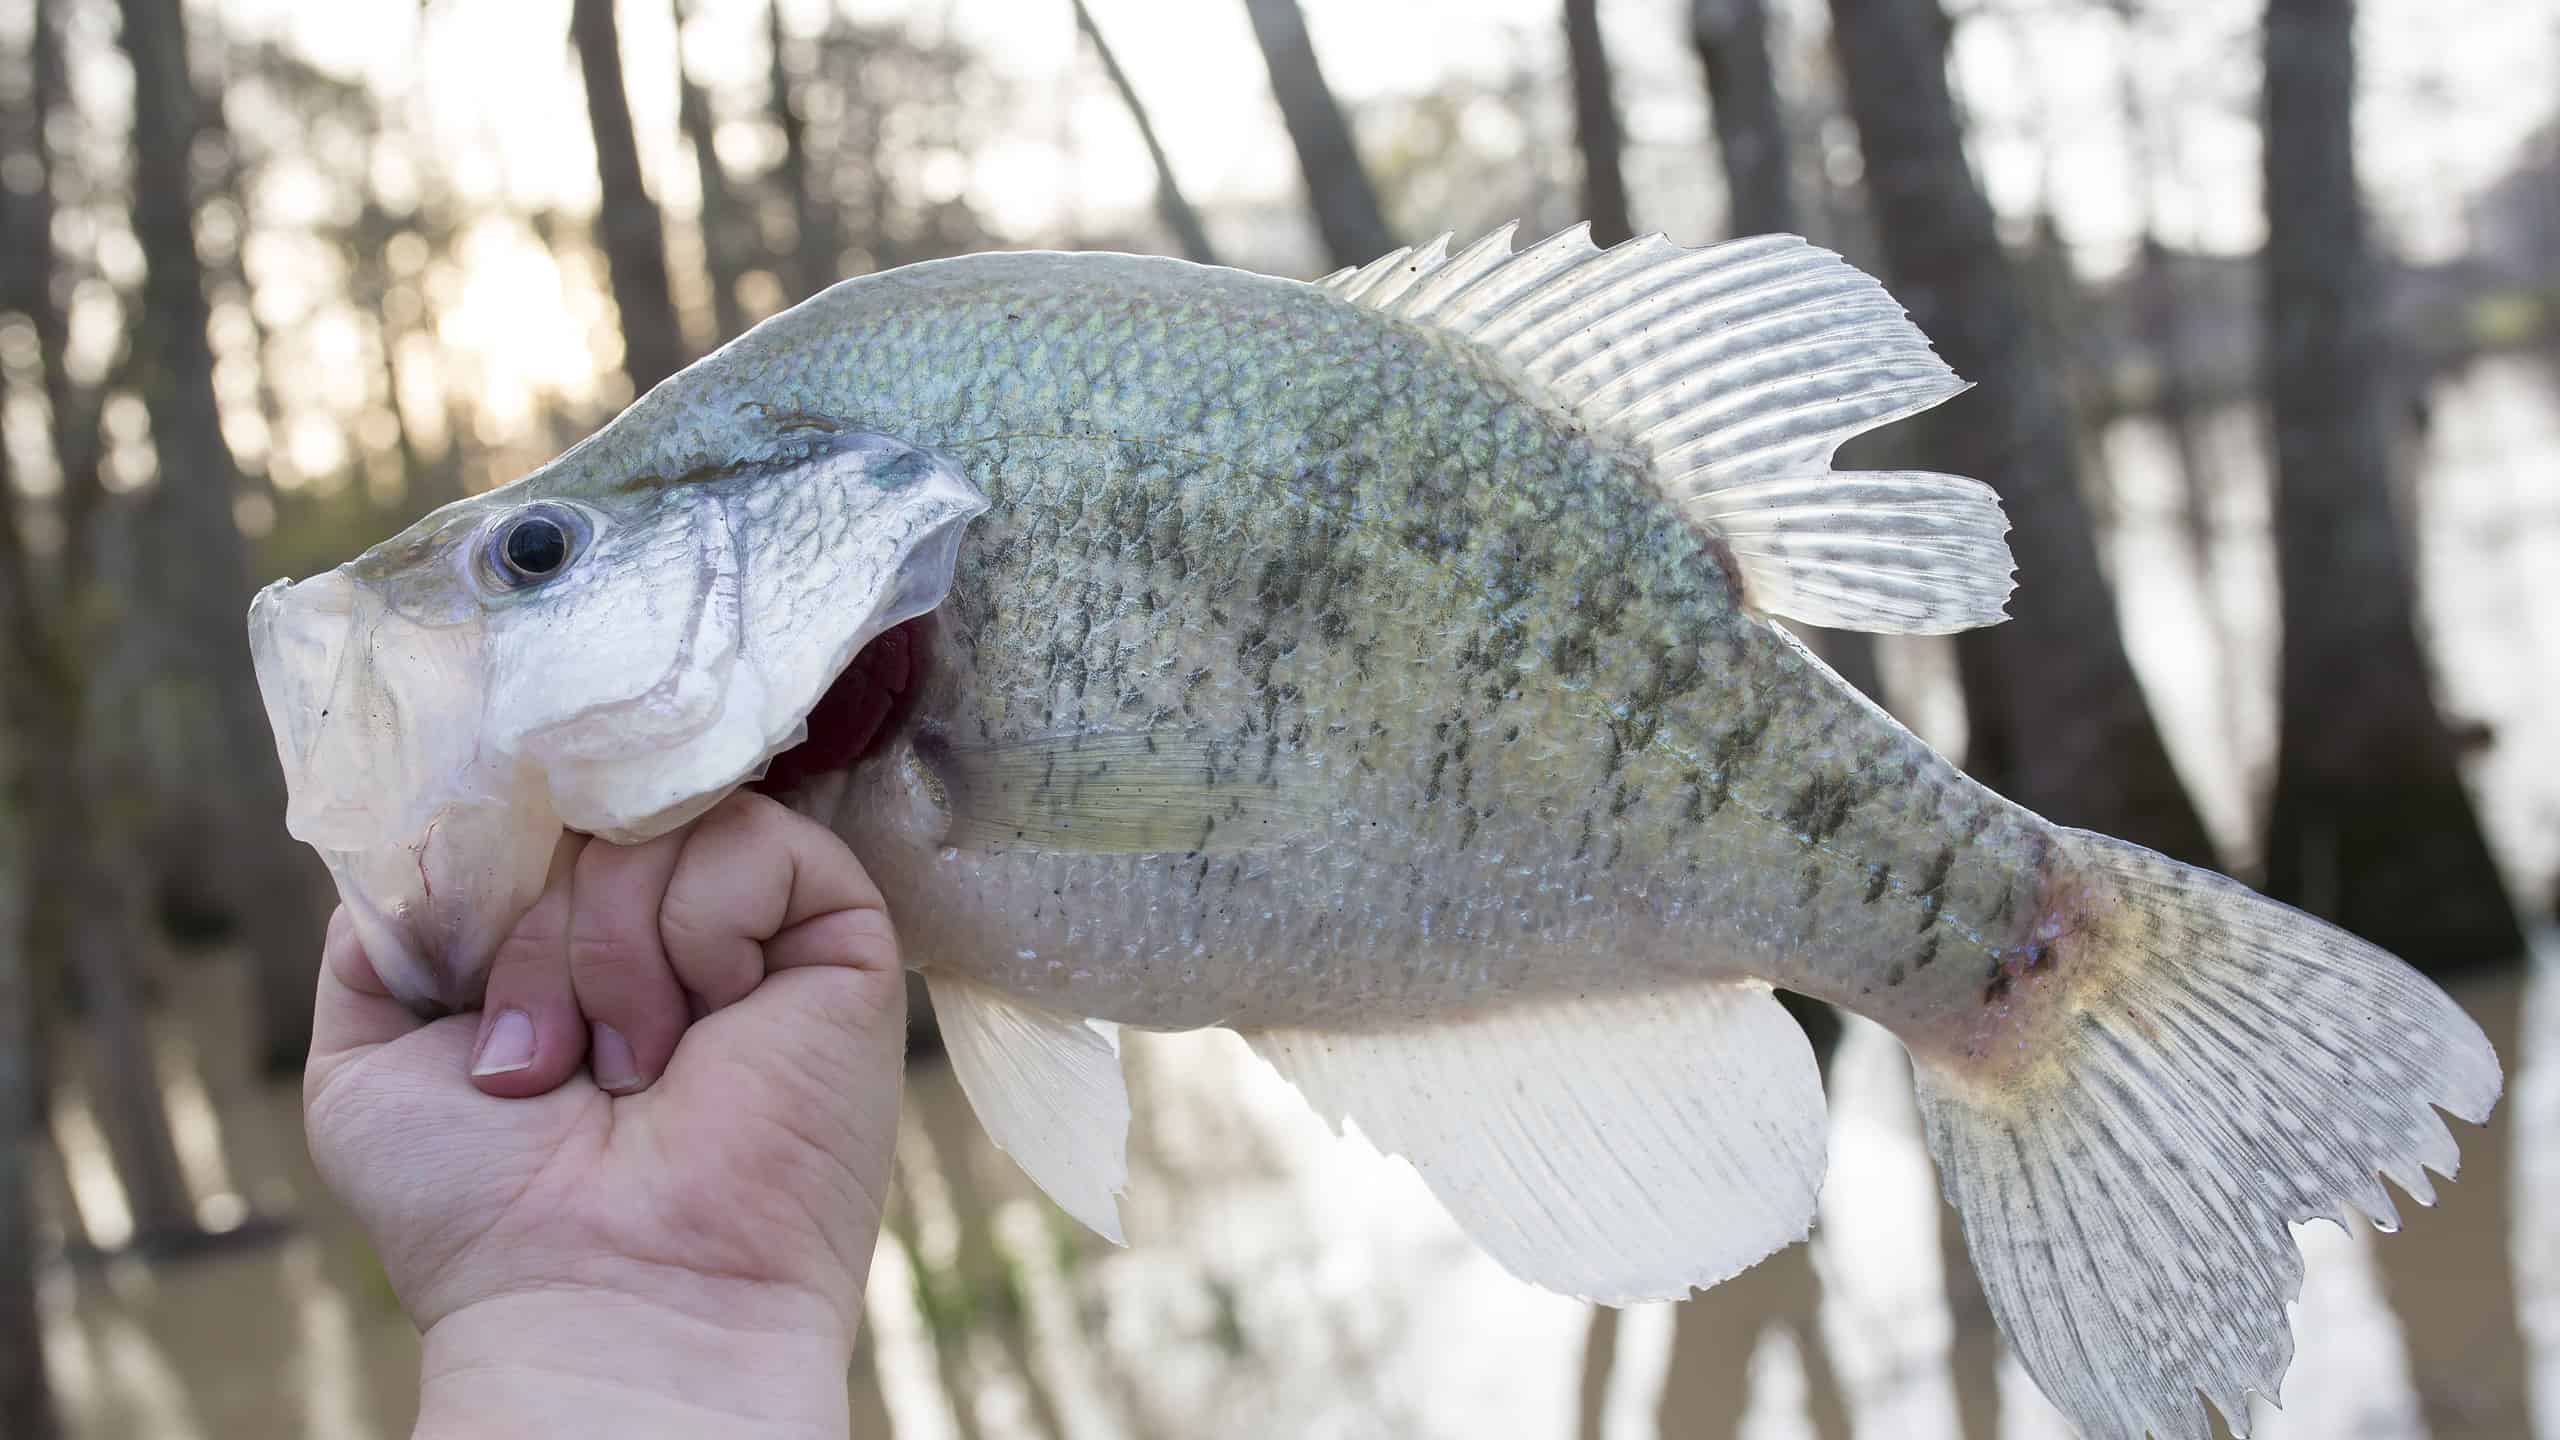 Large white crappie